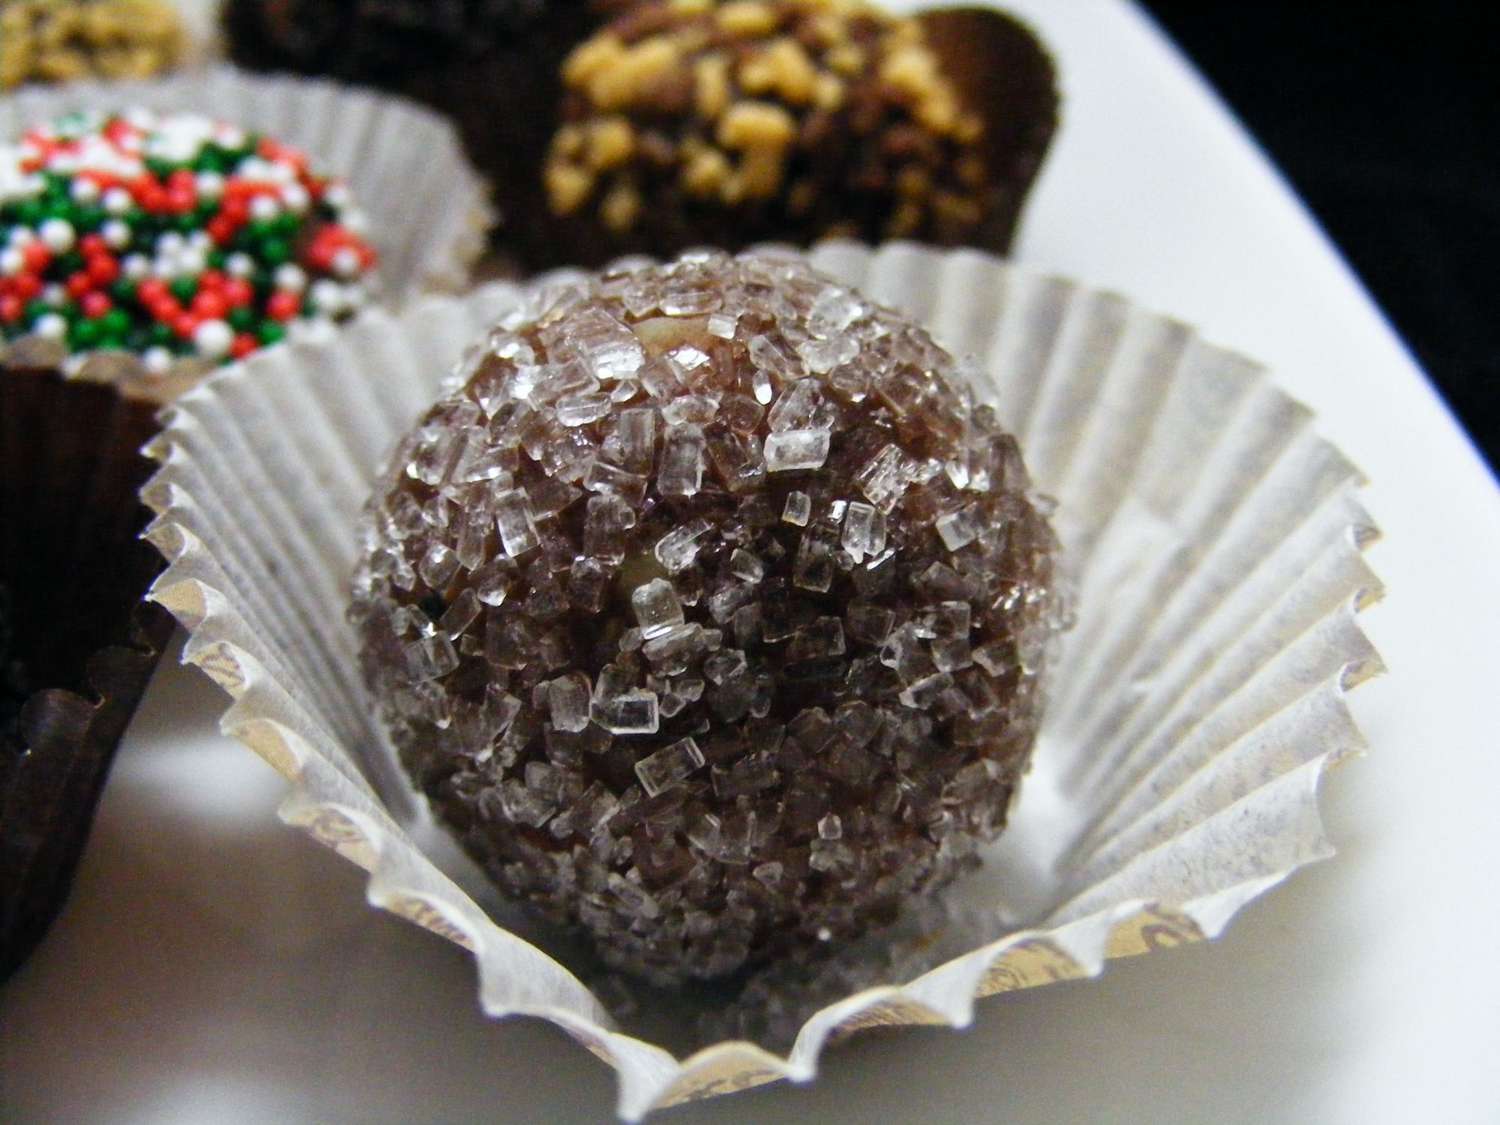 closeup of a rum ball rolled in sparkling sugar in a paper candy cup, with others rolled in different coatings in the background